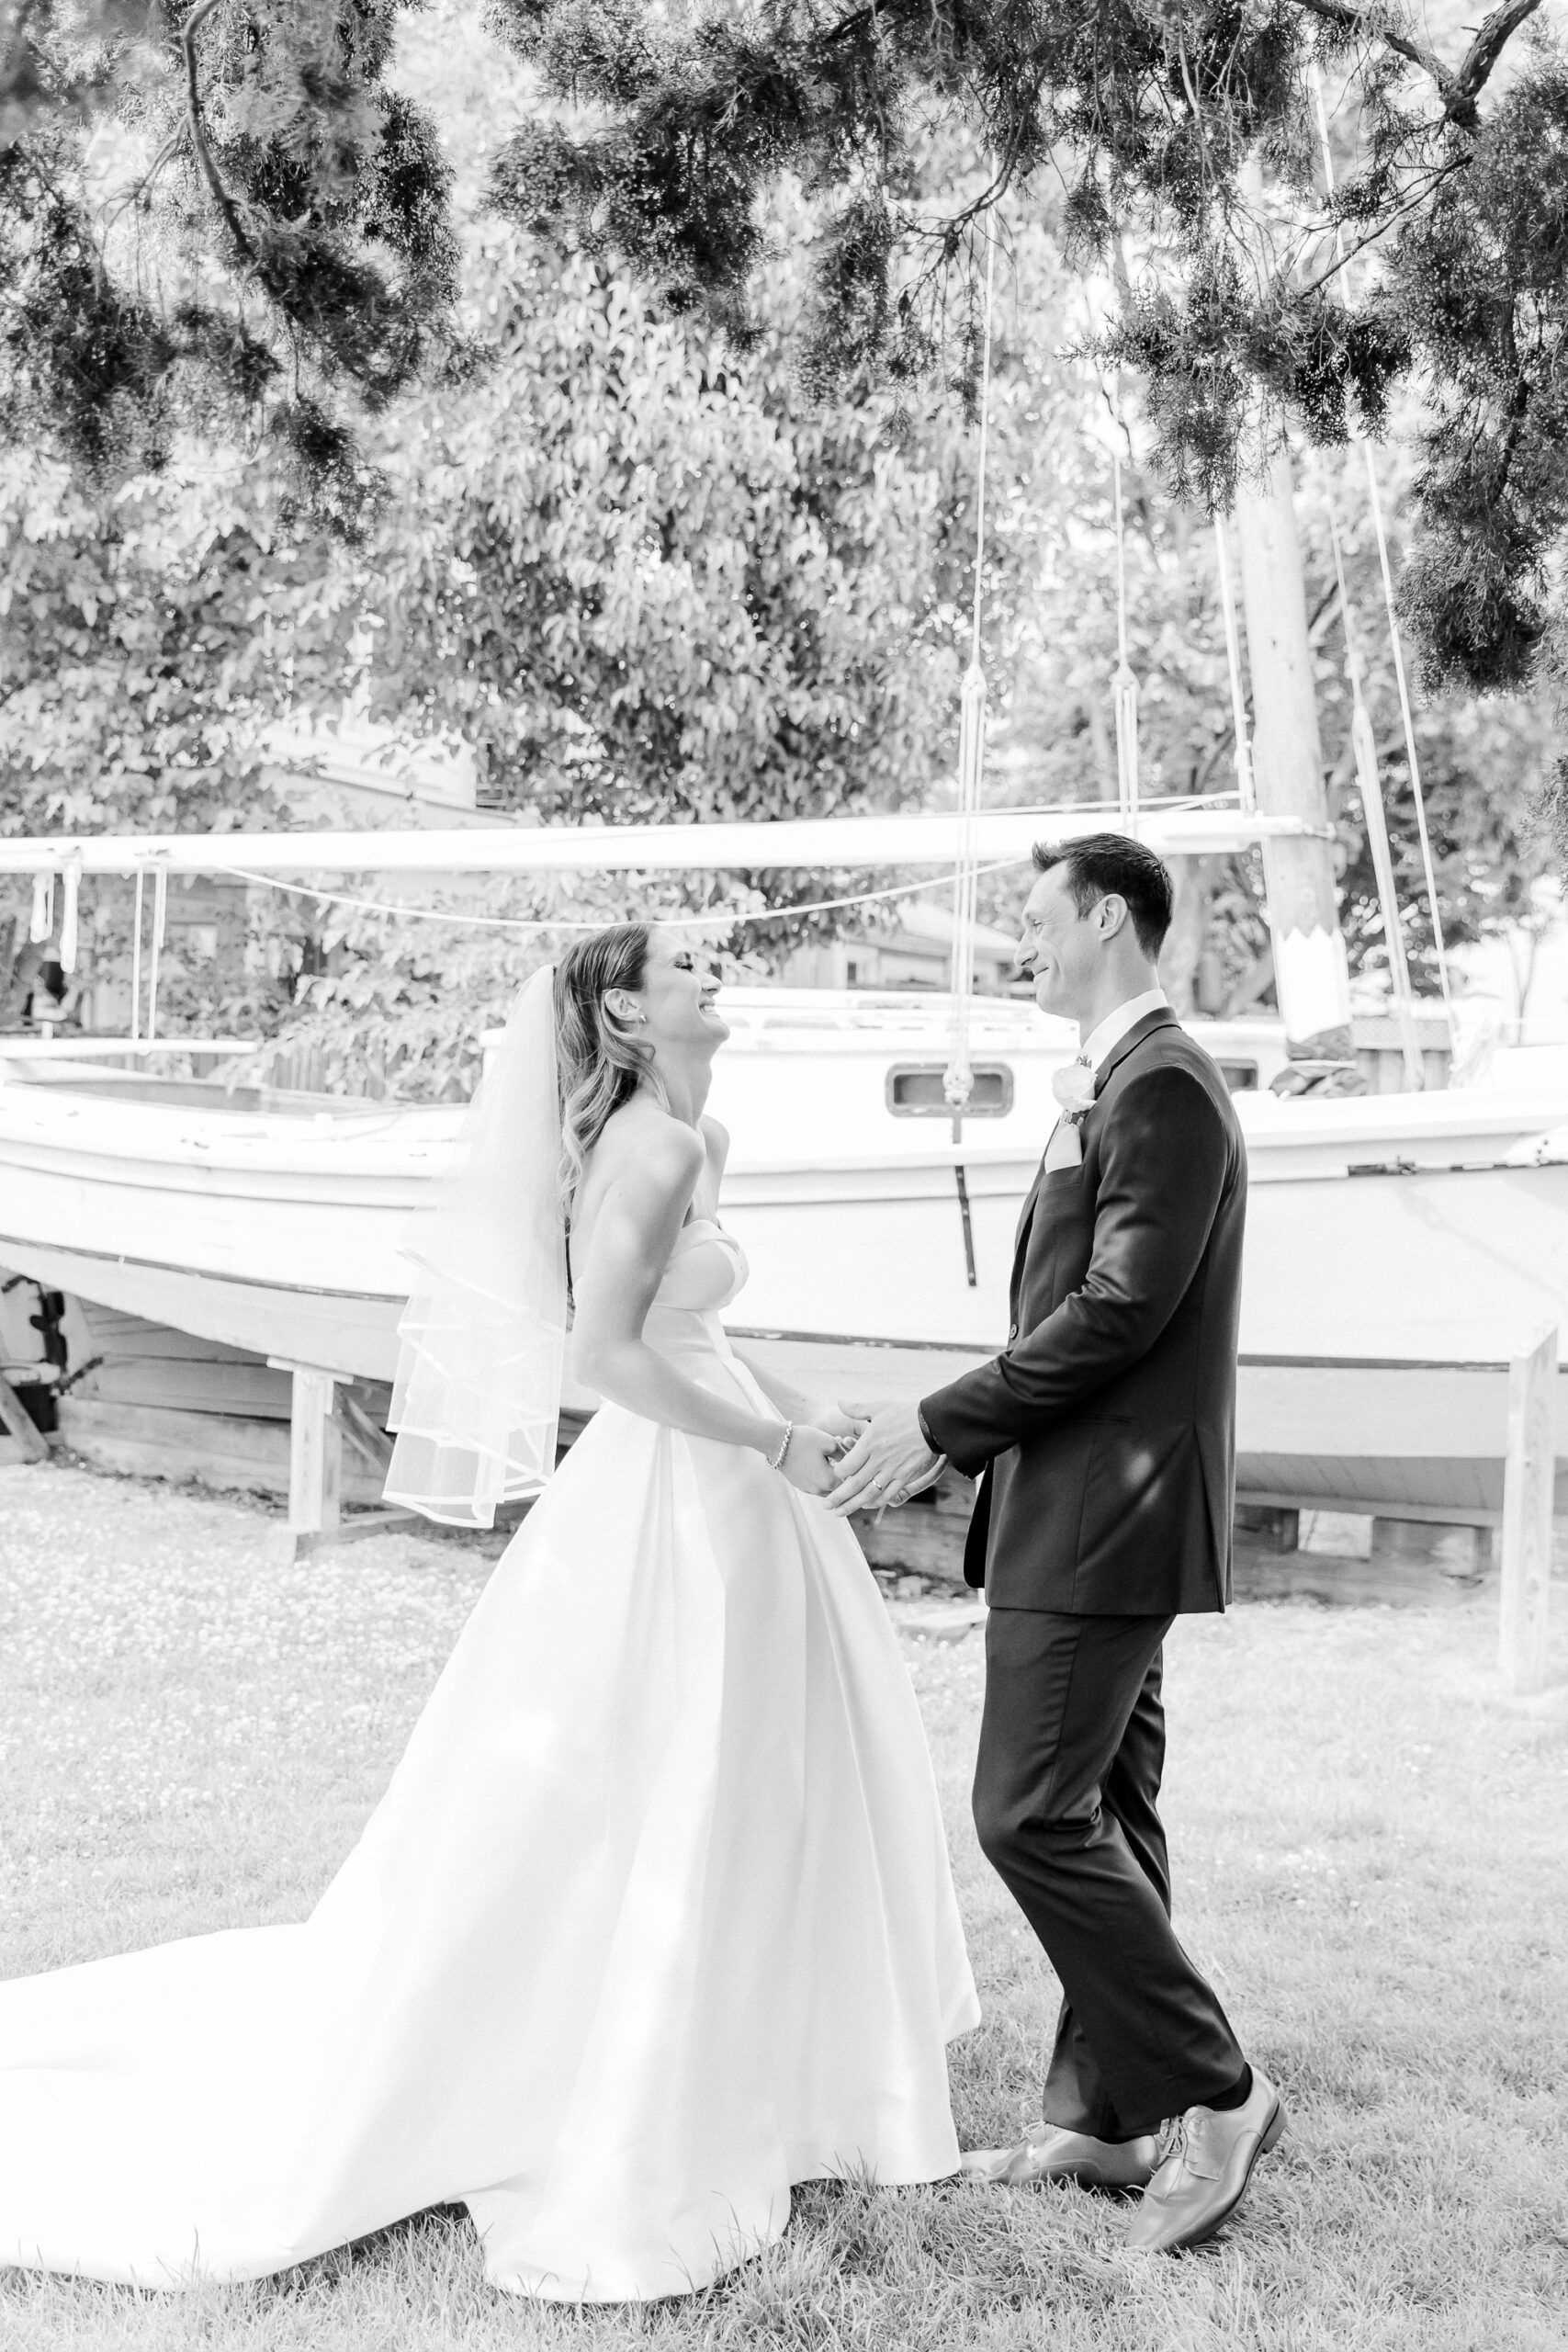 A trendy, chic, waterfront wedding in Annapolis, Maryland.